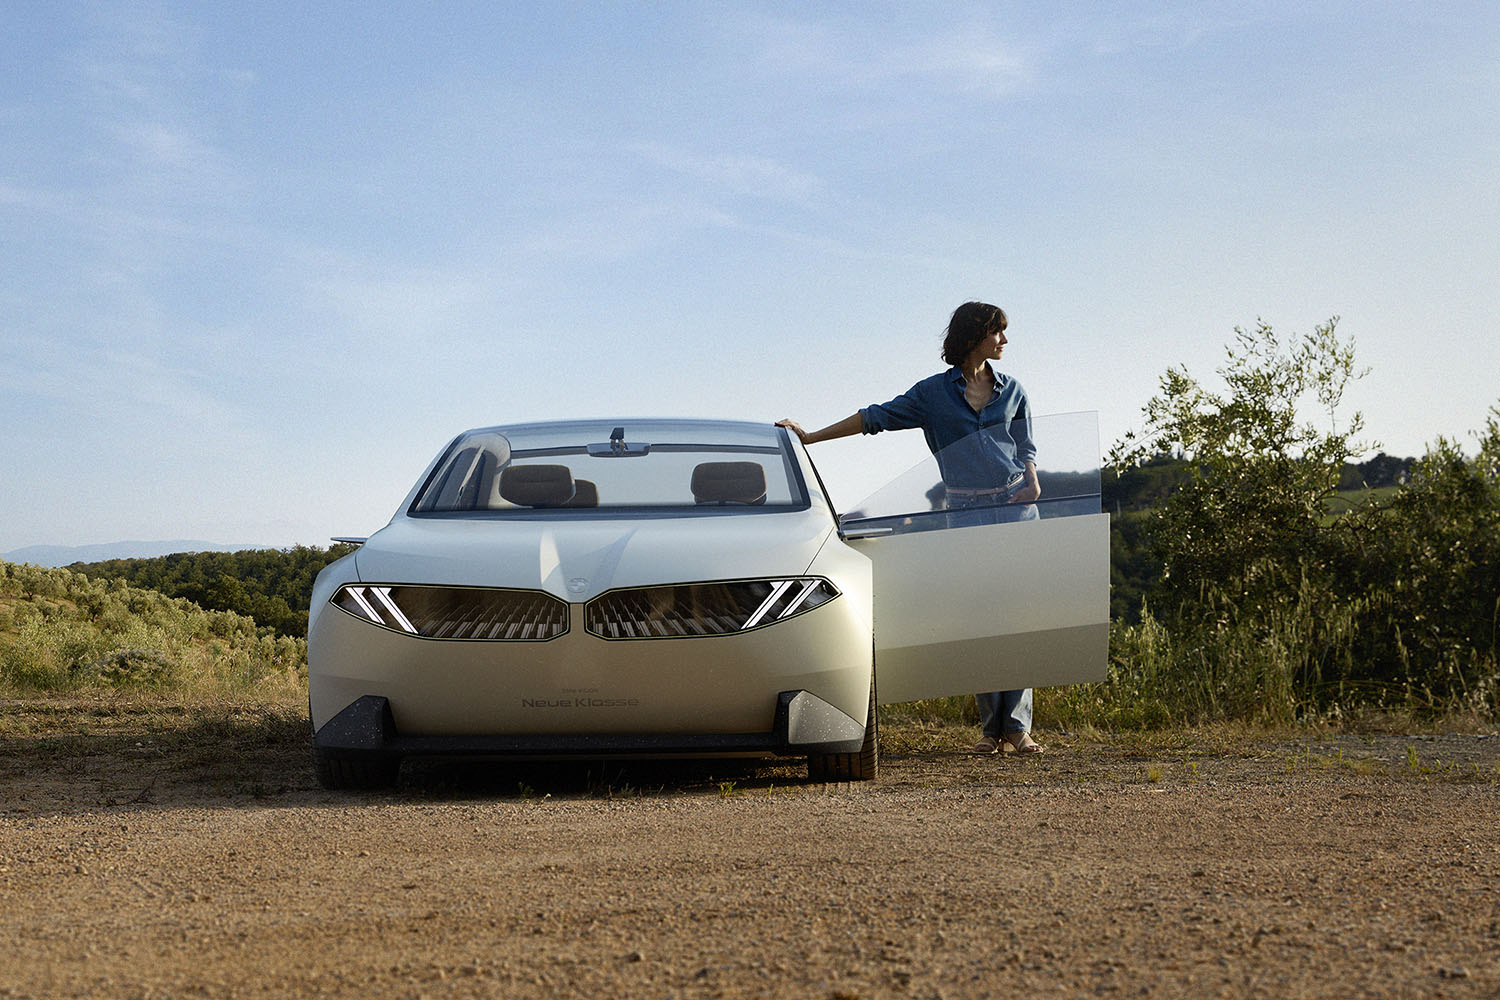 BMW Vision Neue Klasse in Joyous Bright off-white, front view, with woman standing in the opening of the left-front door